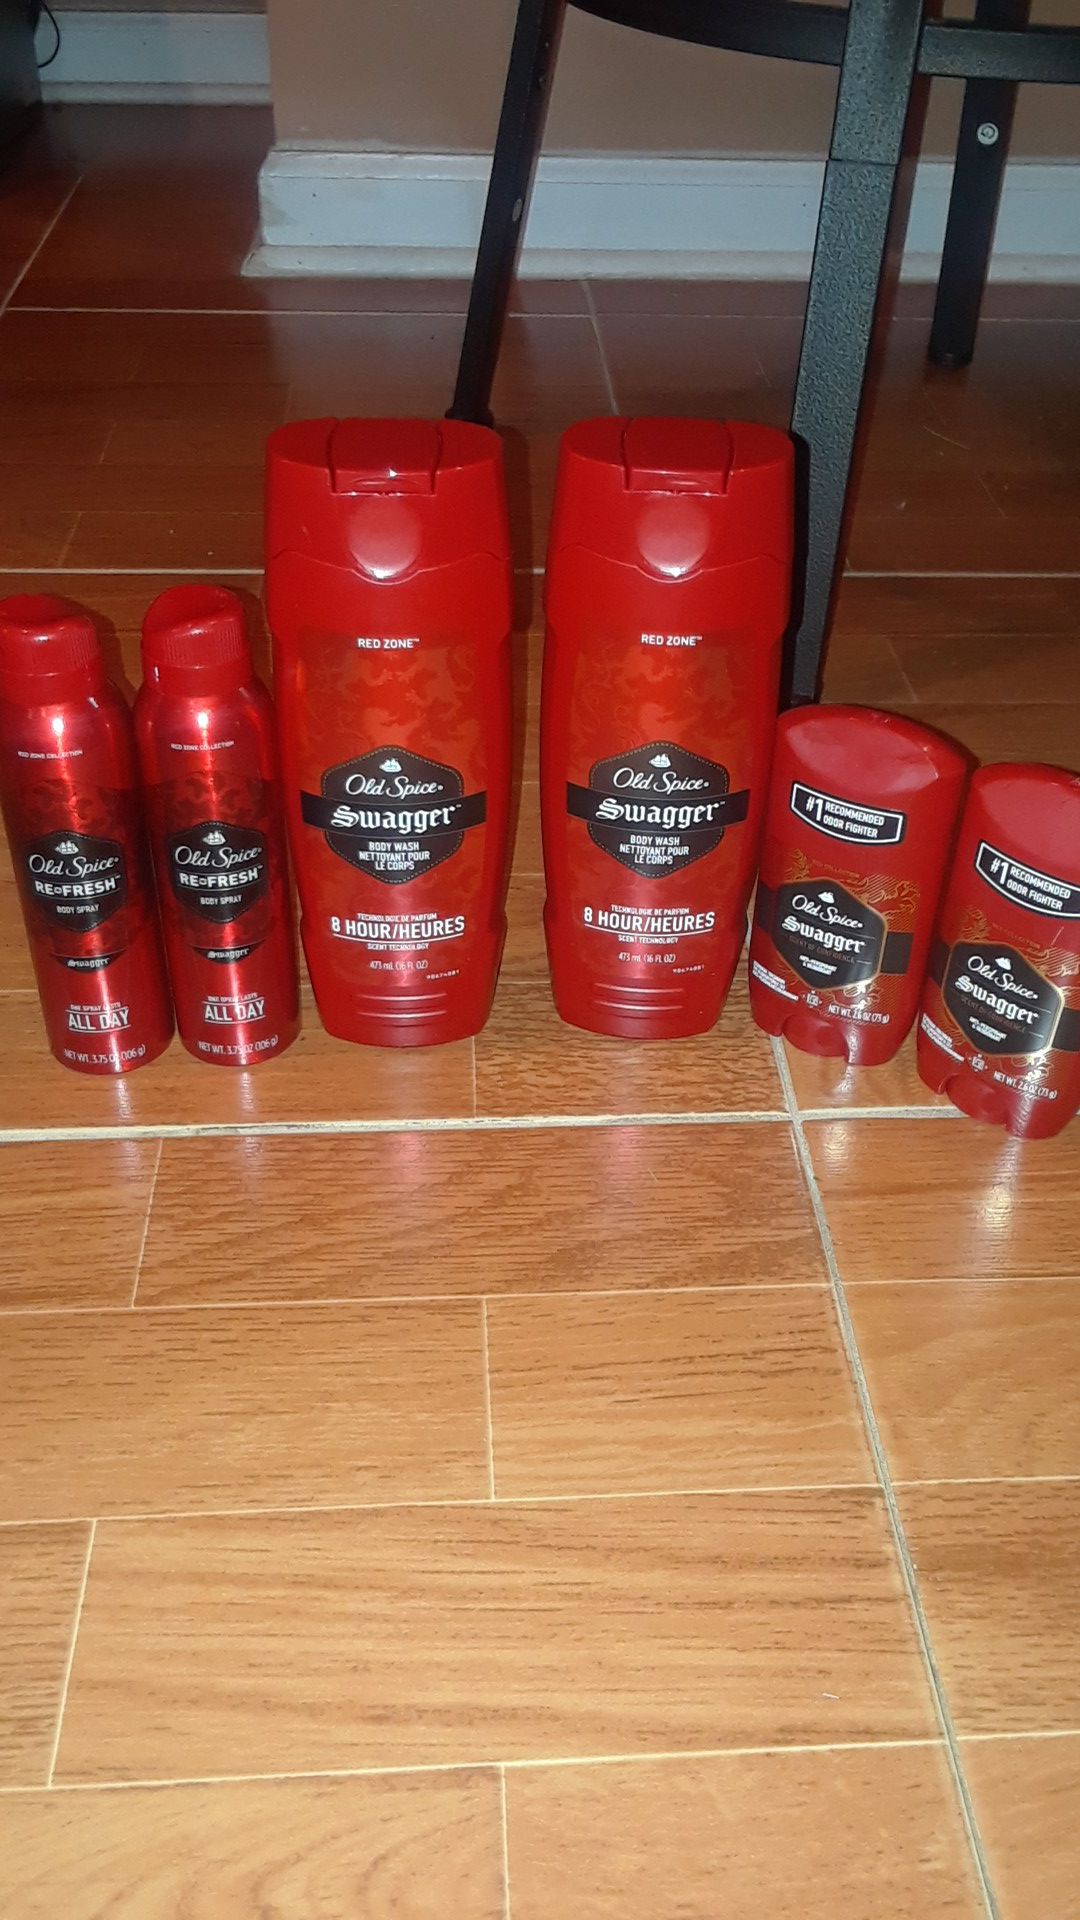 Old spice set (SWAGGER)